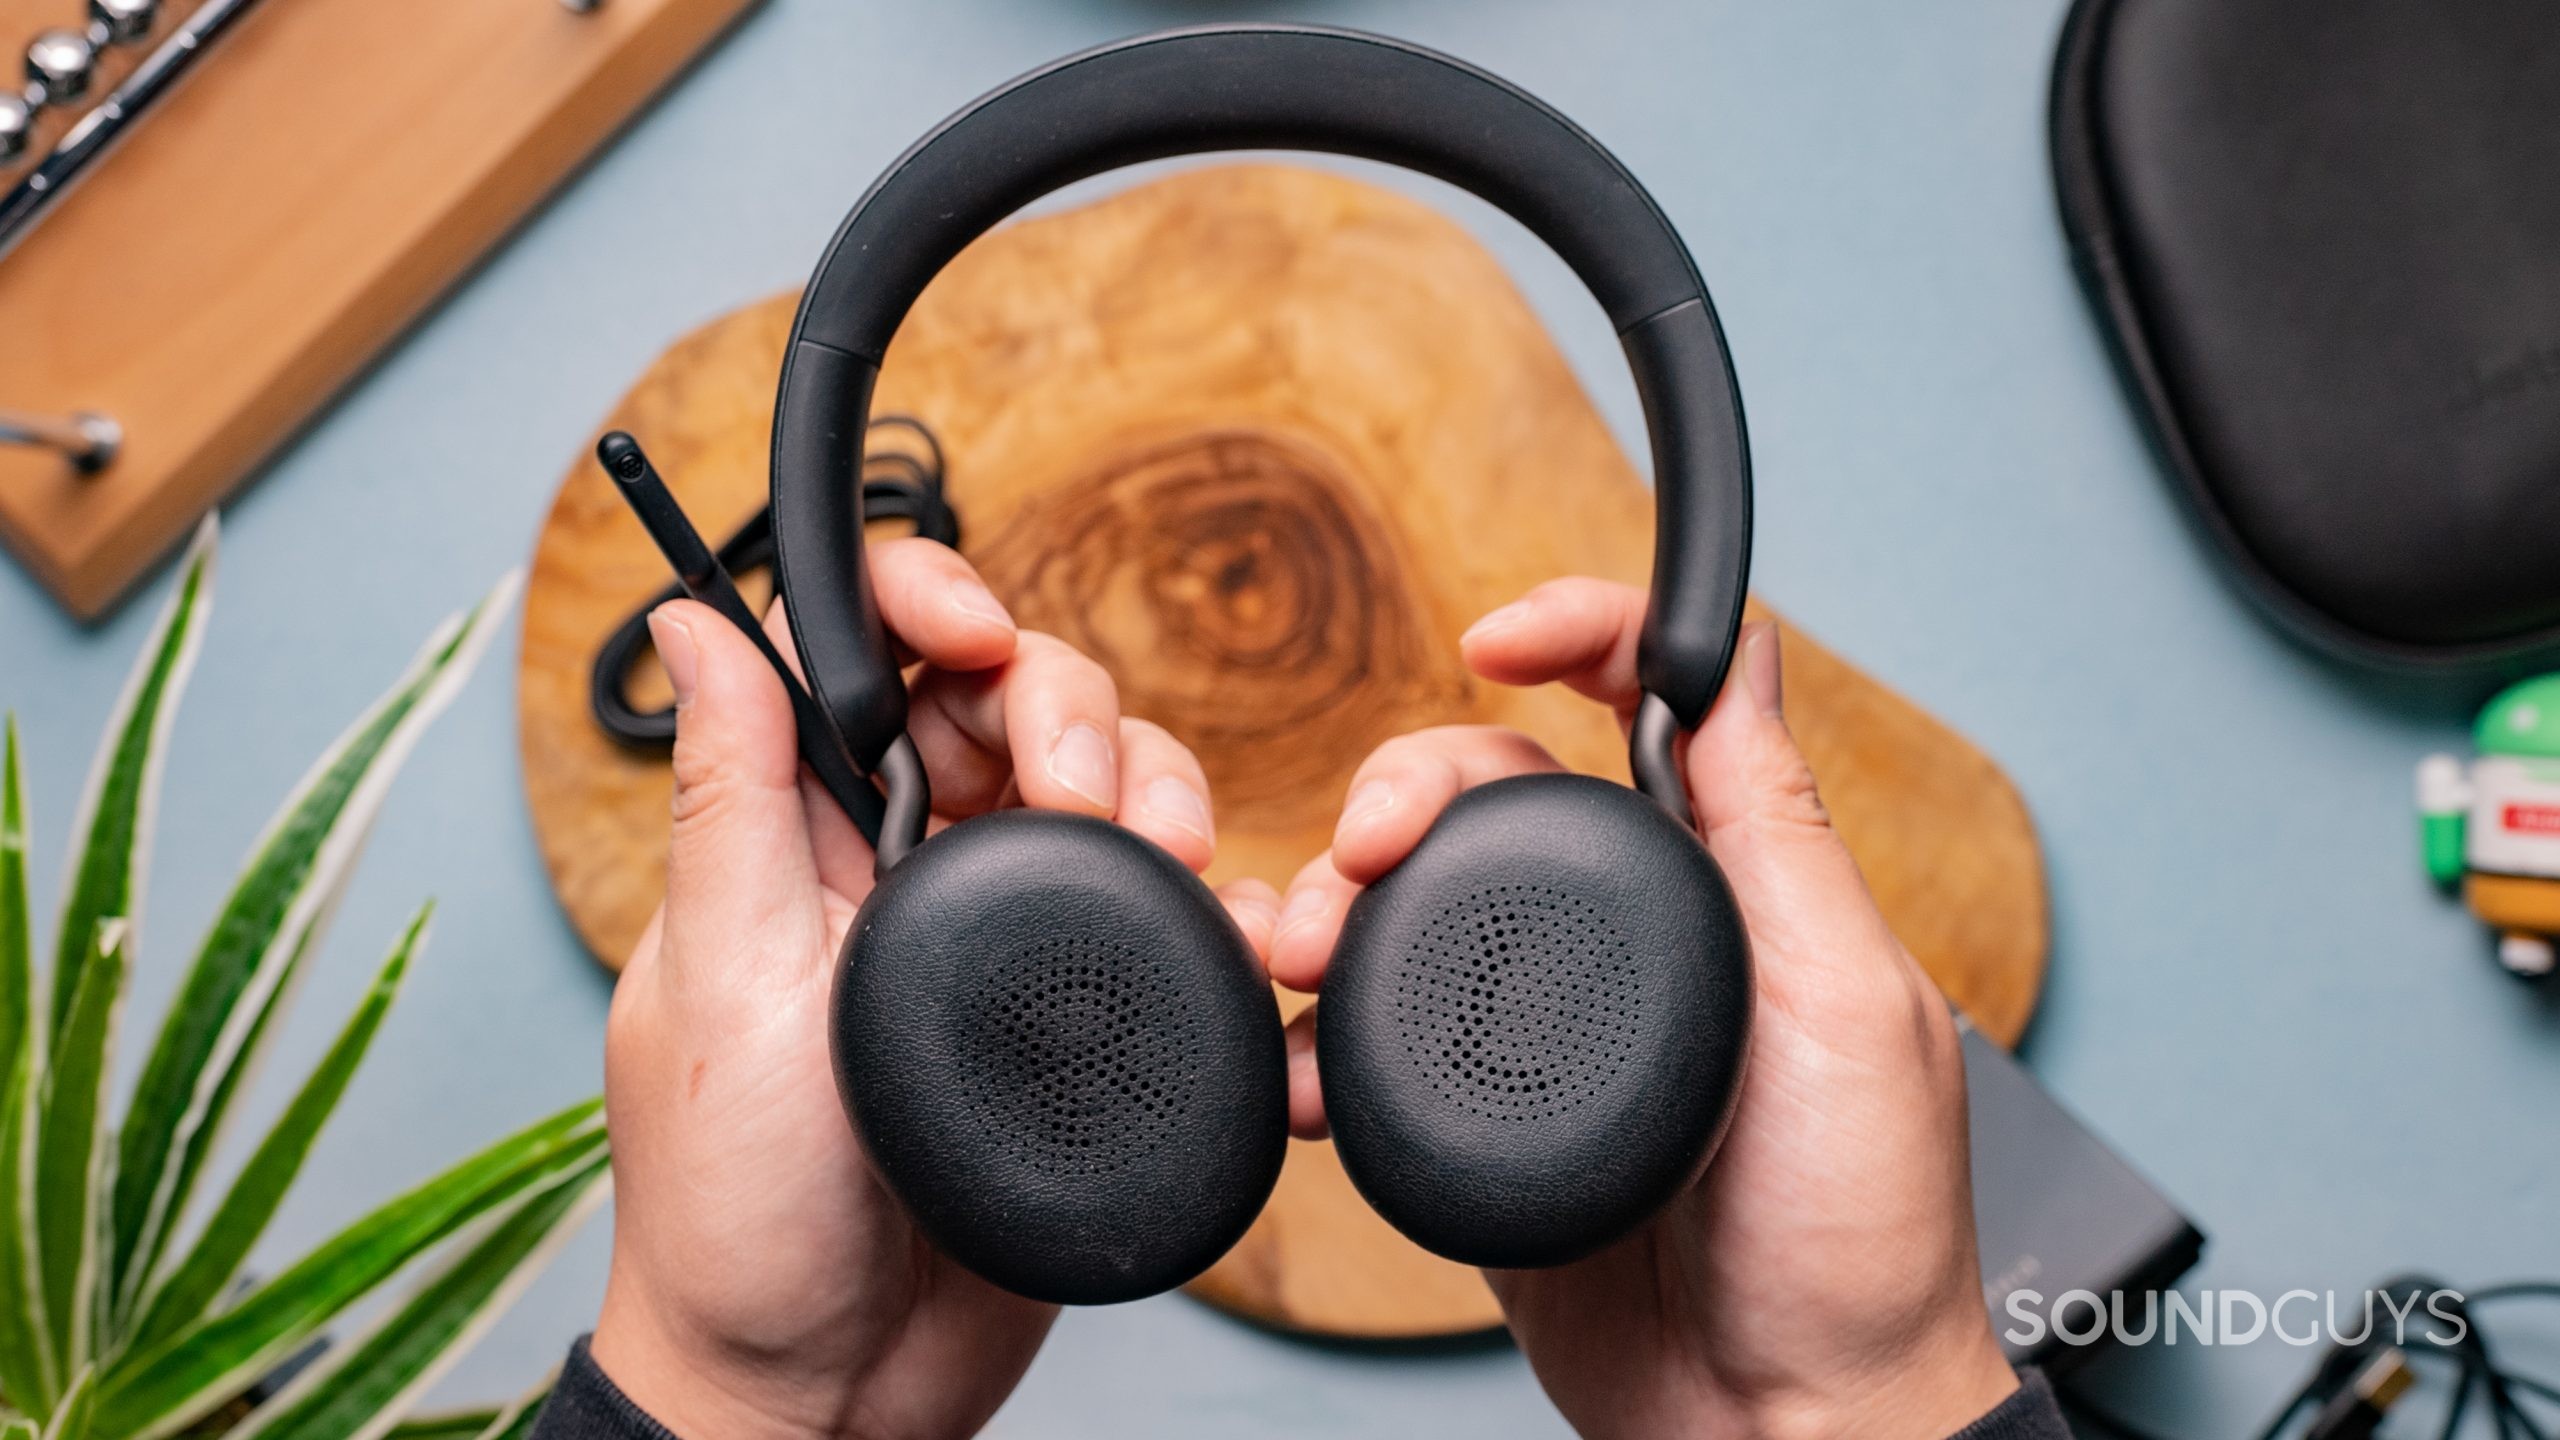 The Jabra Evolve2 65 being held in someone's hands with the earcups facing towards the viewer.